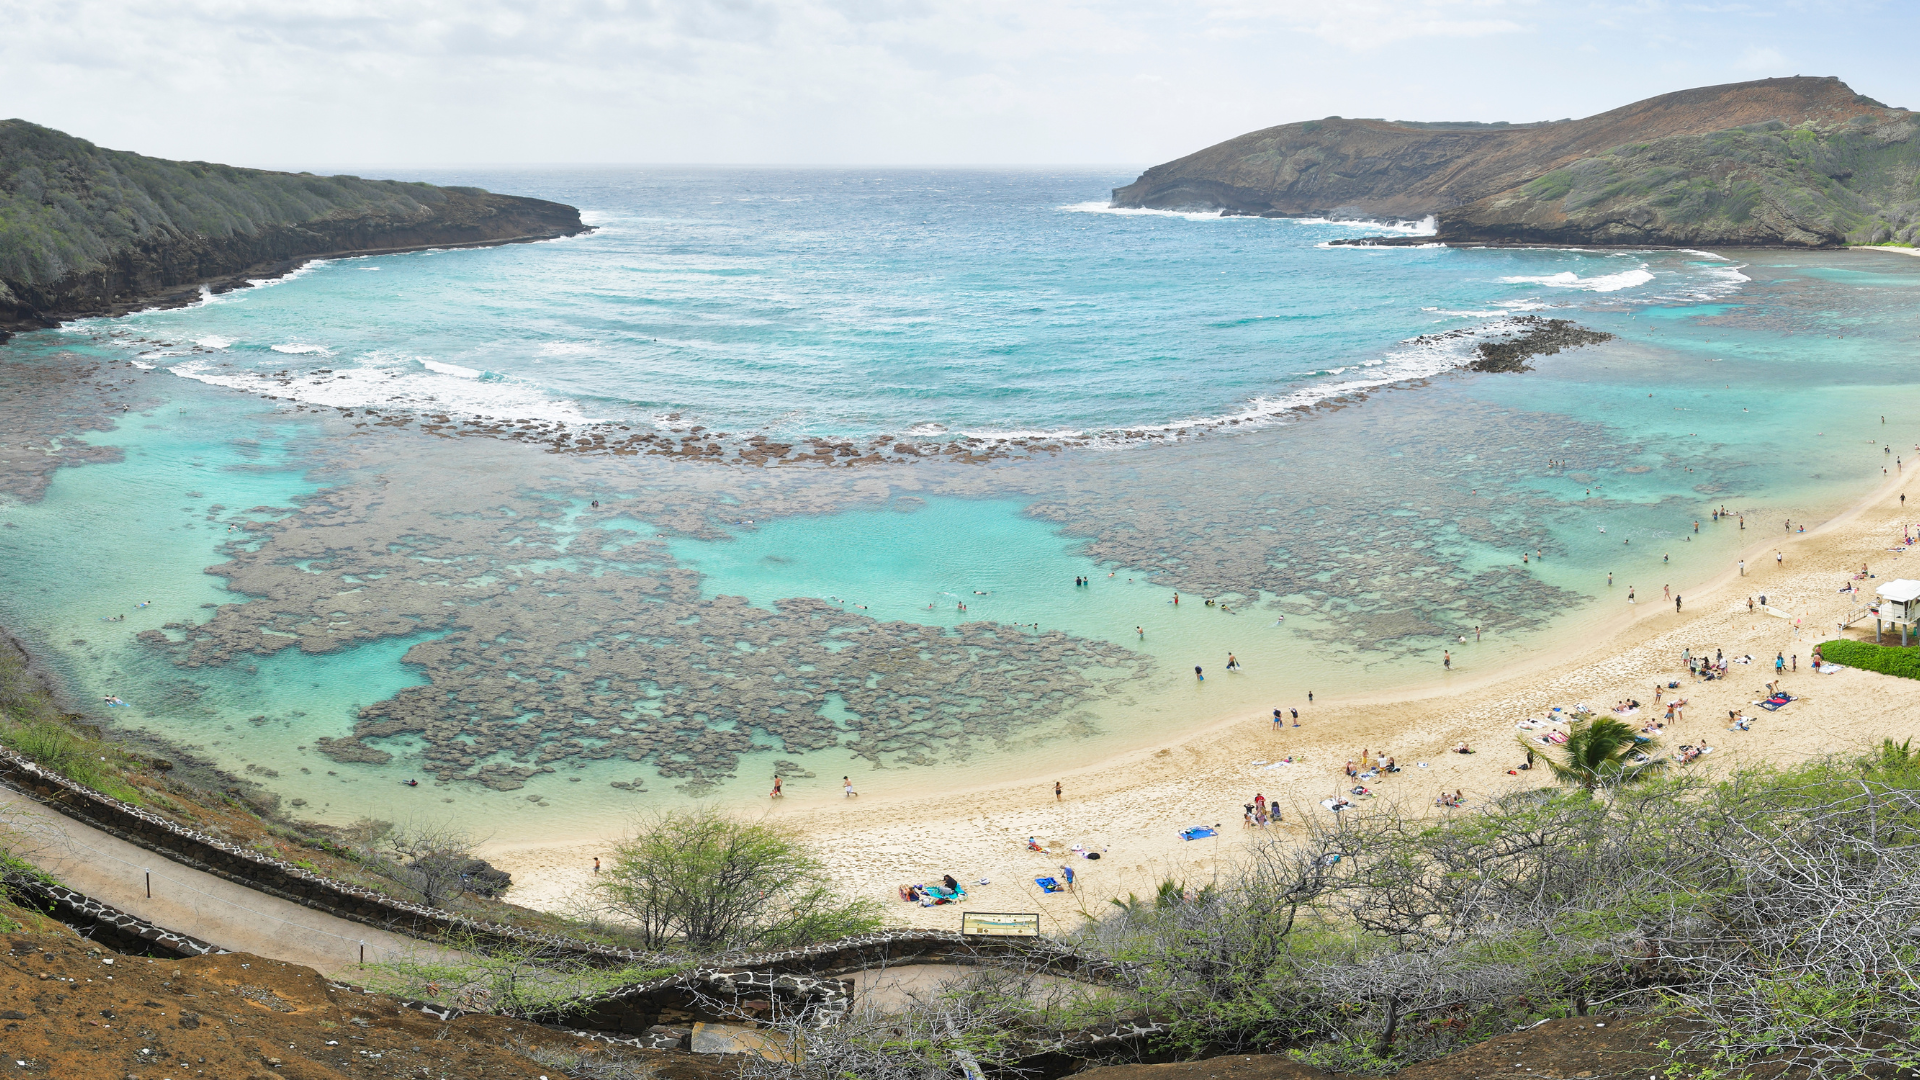 Episode 7 Of Our Ongoing Series On Coral Restoration At Hanauma Bay